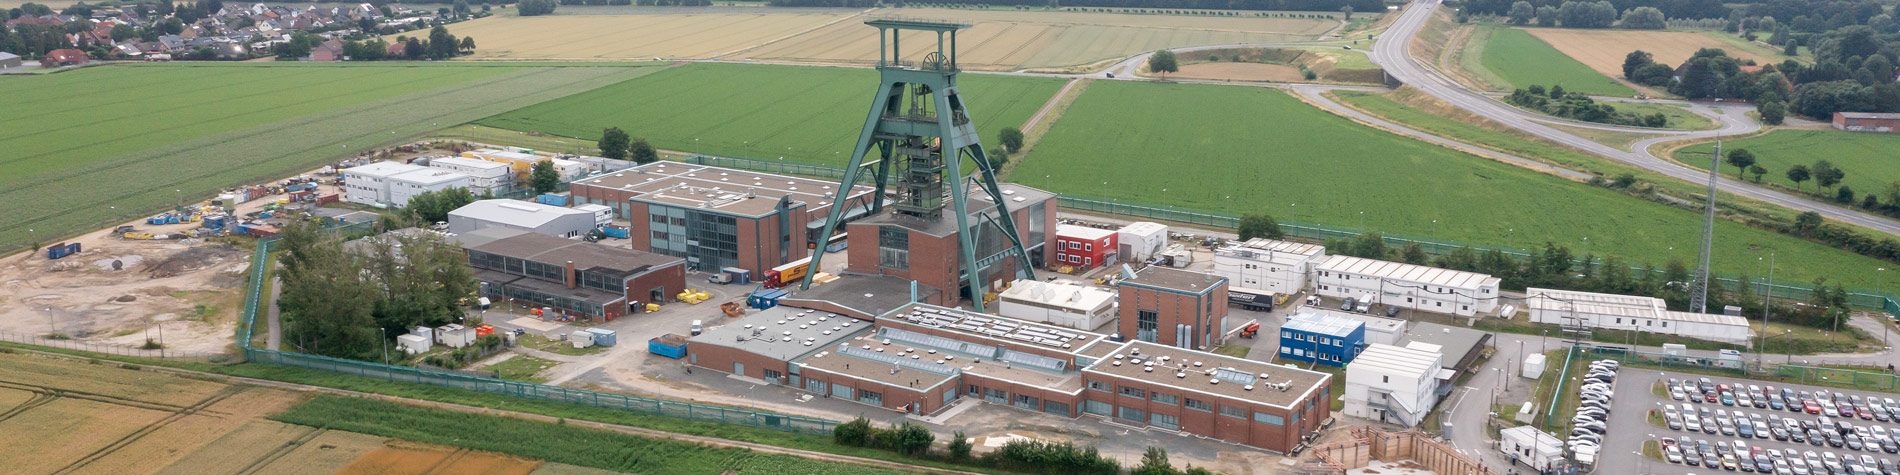 Aerial view of the Konrad repository in Summer 2021